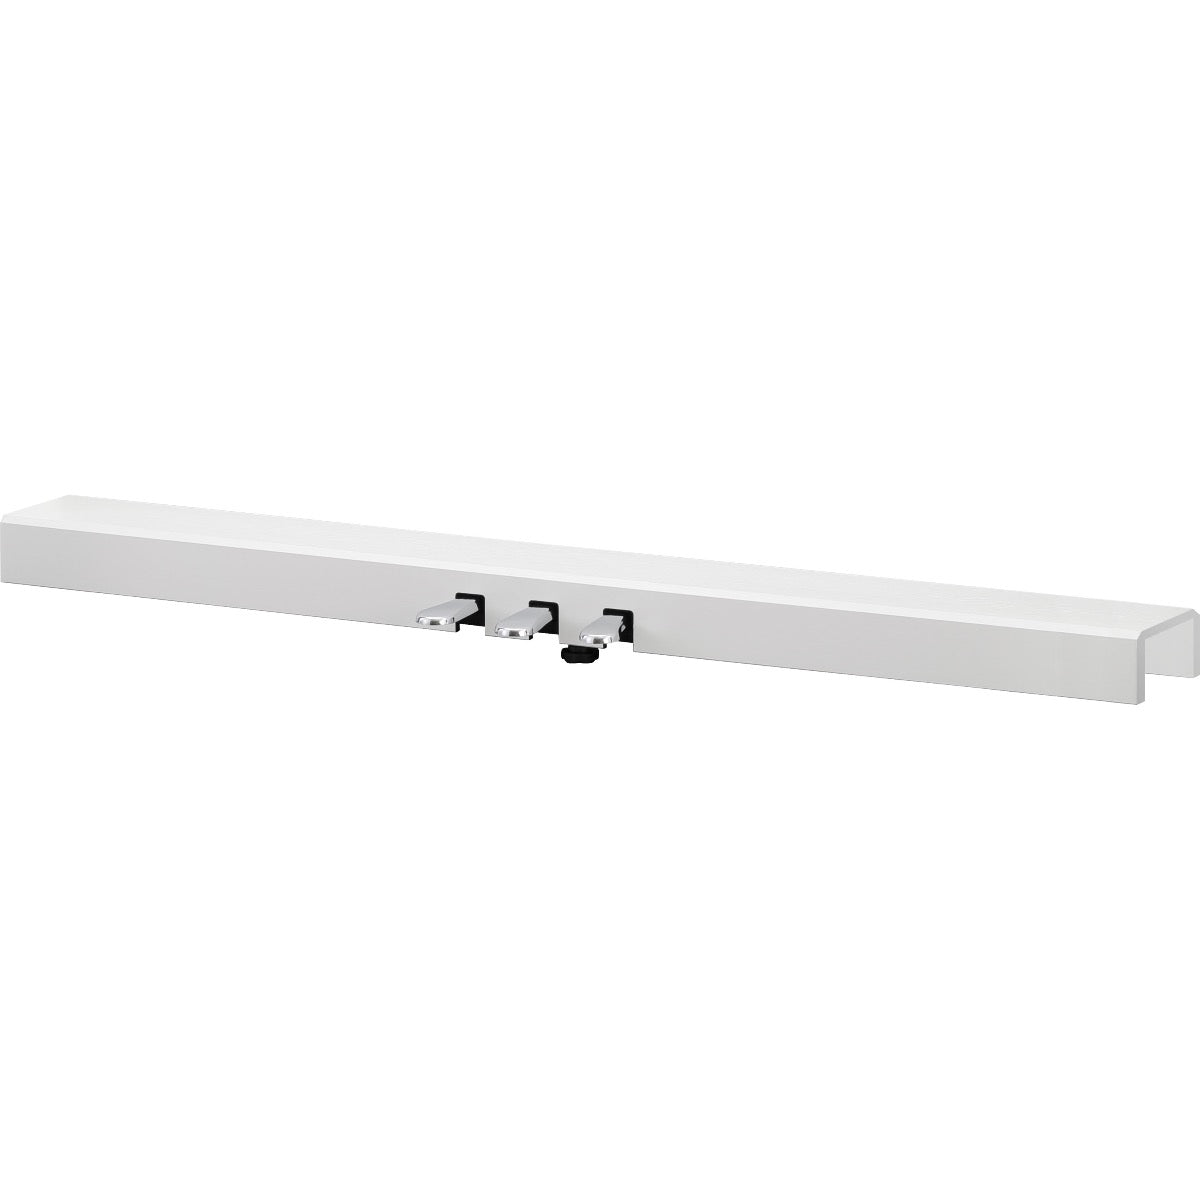 3/4 view of Kawai F-302 Grand Feel Pedal Bar - White showing front, top and right side